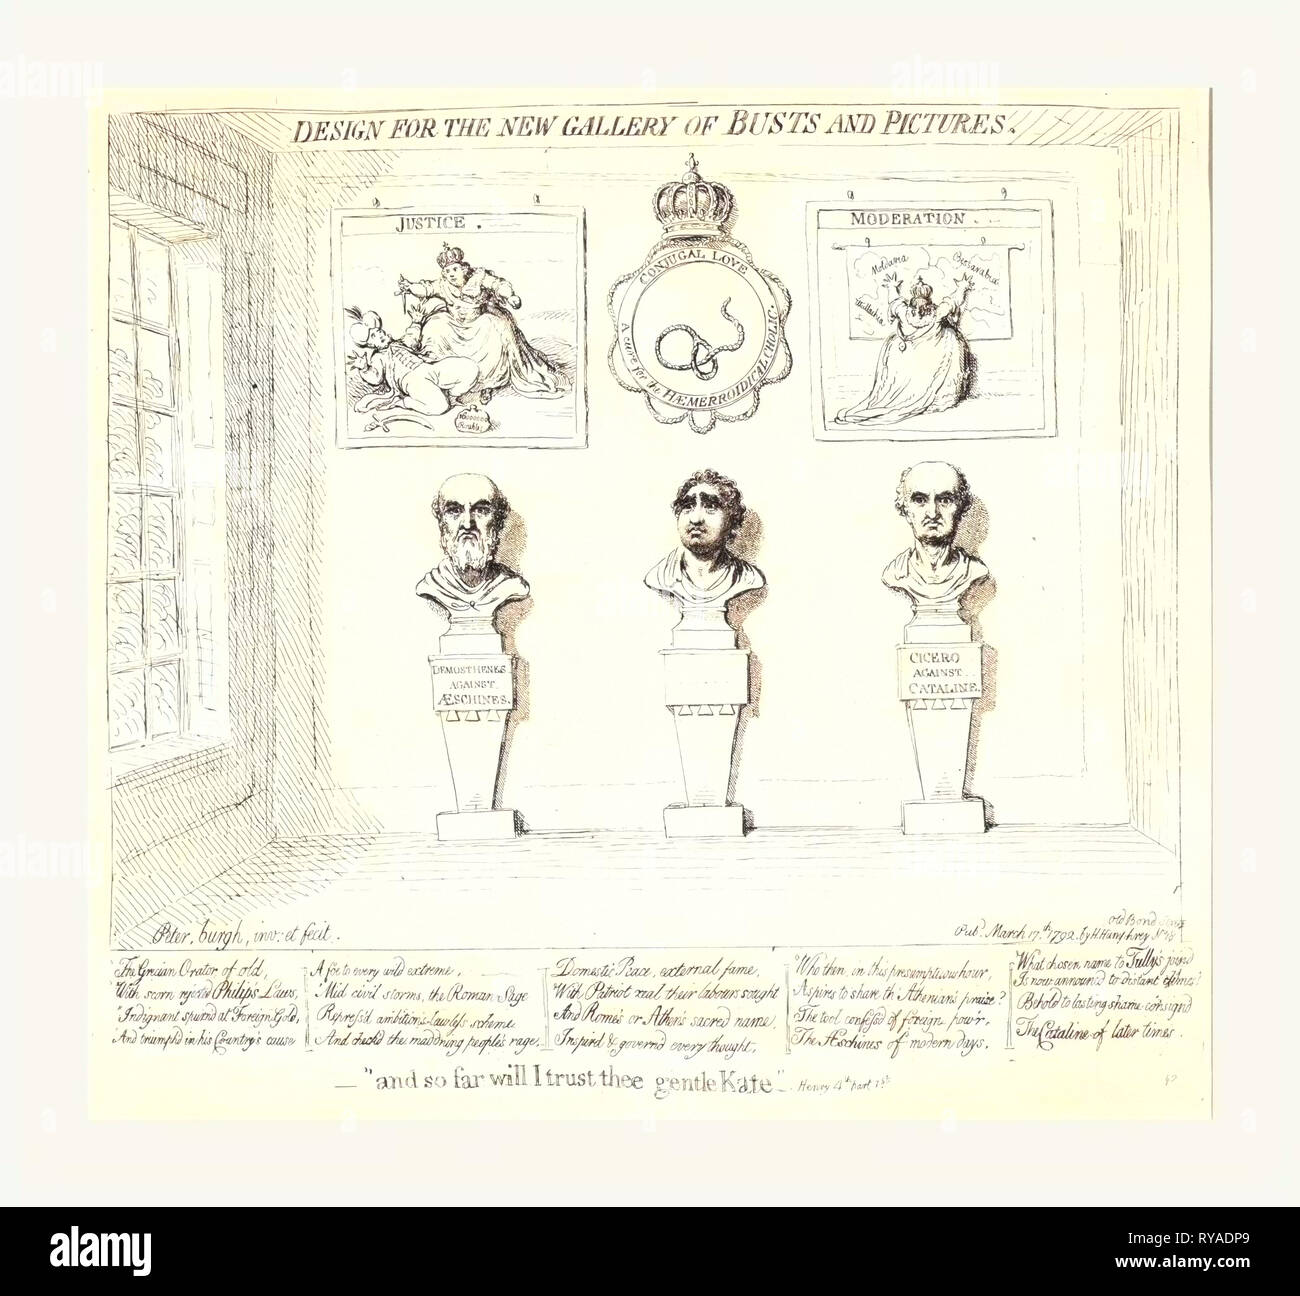 Design for the New Gallery of Busts and Pictures, and So Far Will I Trust Thee Gentle Kate, Henry 4th, Part 1st , Gillray, James, 1756-1815, Engraving 1792, Interior View of a Portrait Gallery with Busts of Demosthenes and Cicero, Both Frowning, and Between Them a Bust of Charles J. Fox, Hanging on the Wall above Are Two Prints Showing Catherine II of Russia, in One, Titled Justice, She is About to Stab a Sultan, in the Other, Moderation, She is Facing a Map of Moldavia, Bessarabia, and Wallachia, which She Embraces with Outspread Arms, Hanging above the Bust of Fox is a Crowned Circle Stock Photo